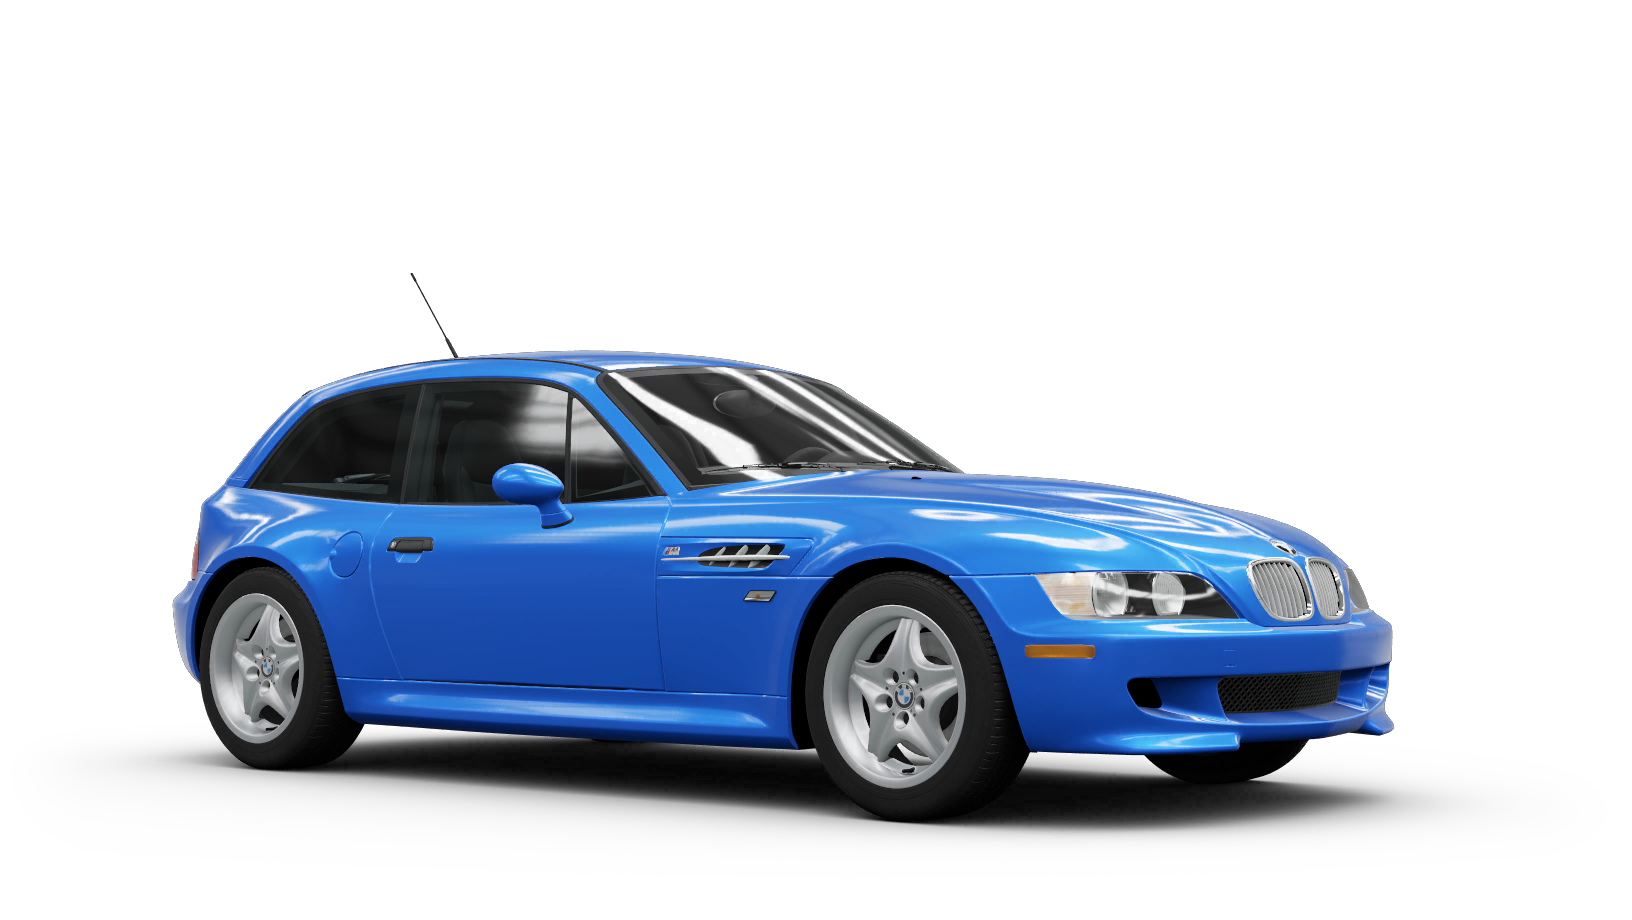 https://static.wikia.nocookie.net/forzamotorsport/images/e/ef/HOR_XB1_BMW_Z3.png/revision/latest?cb=20191111202427